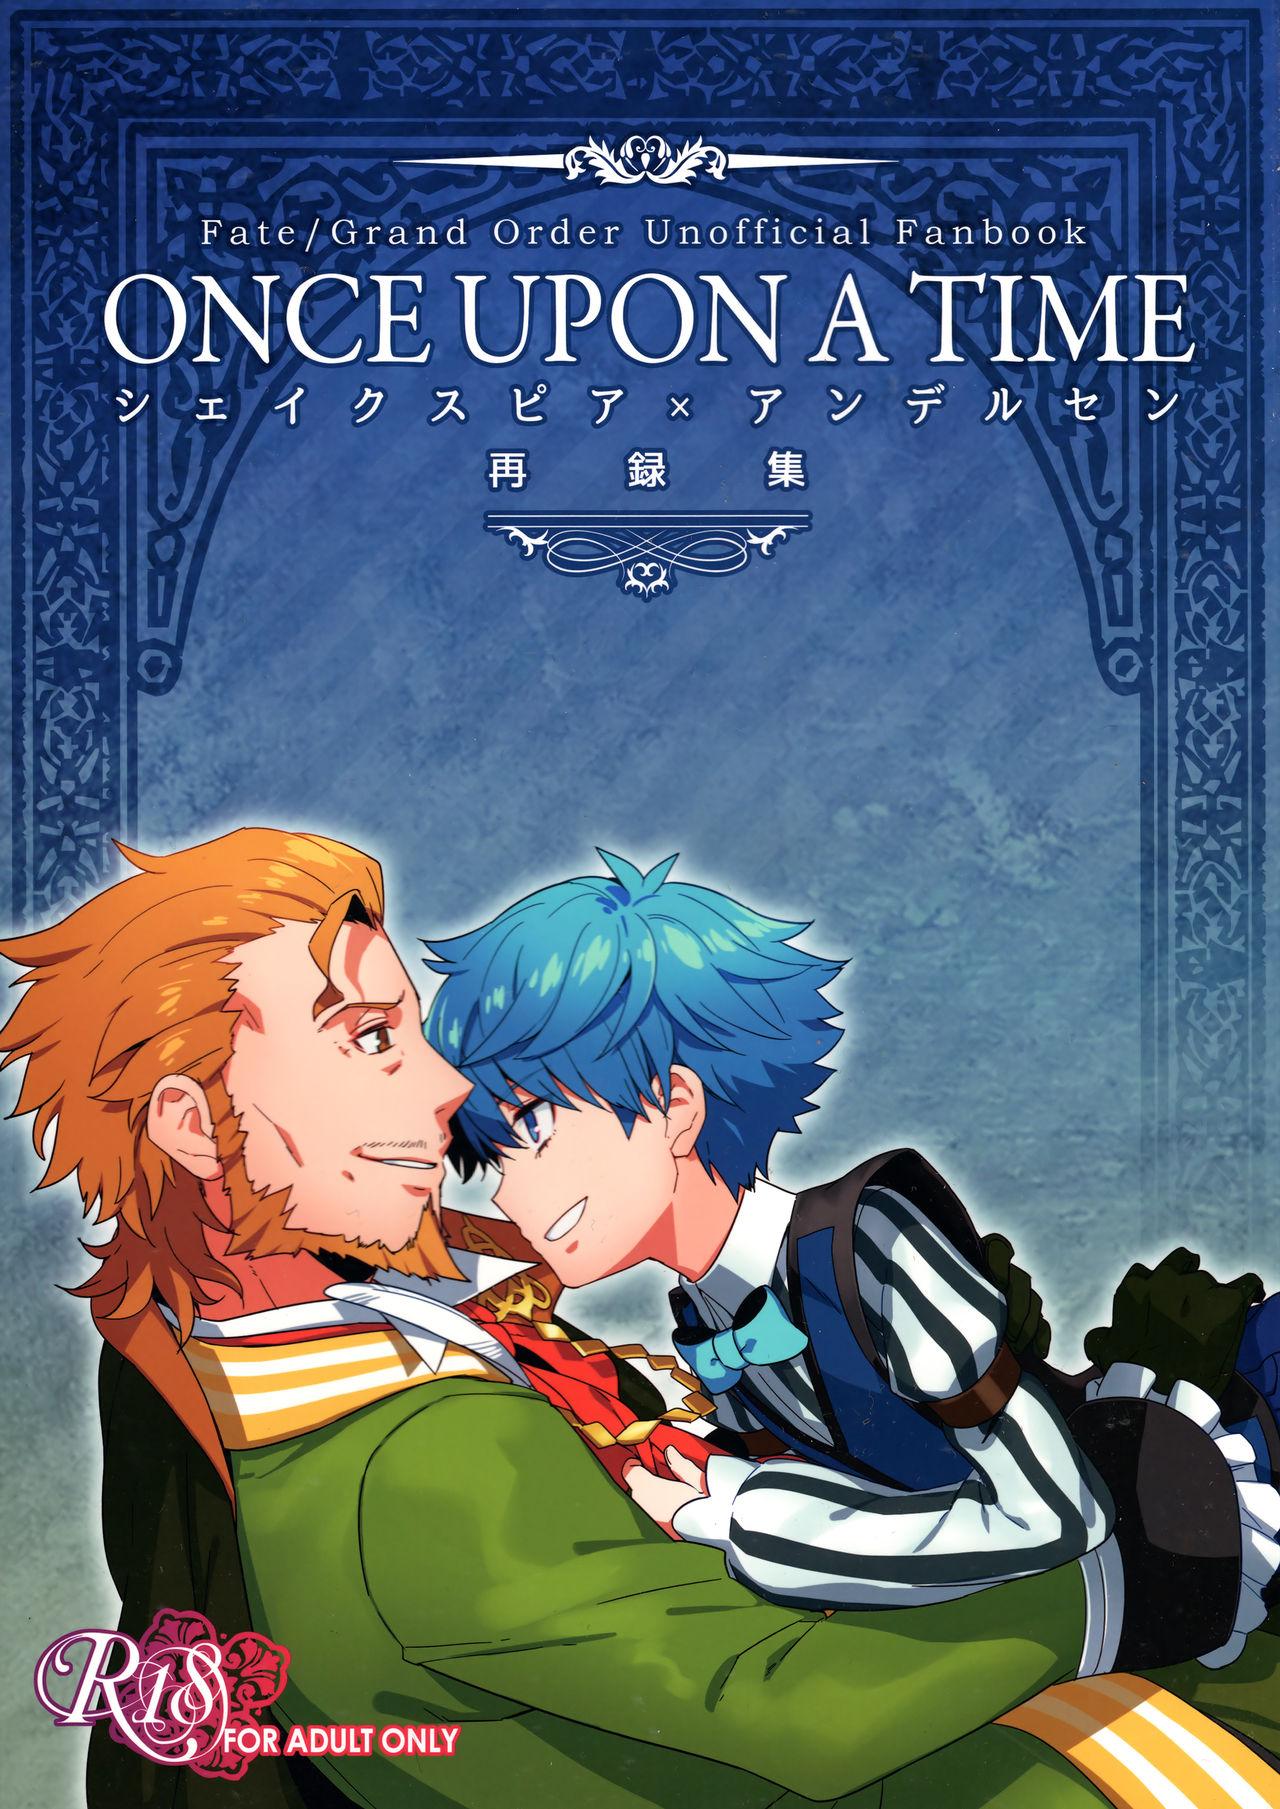 ONCE UPON A TIME 0